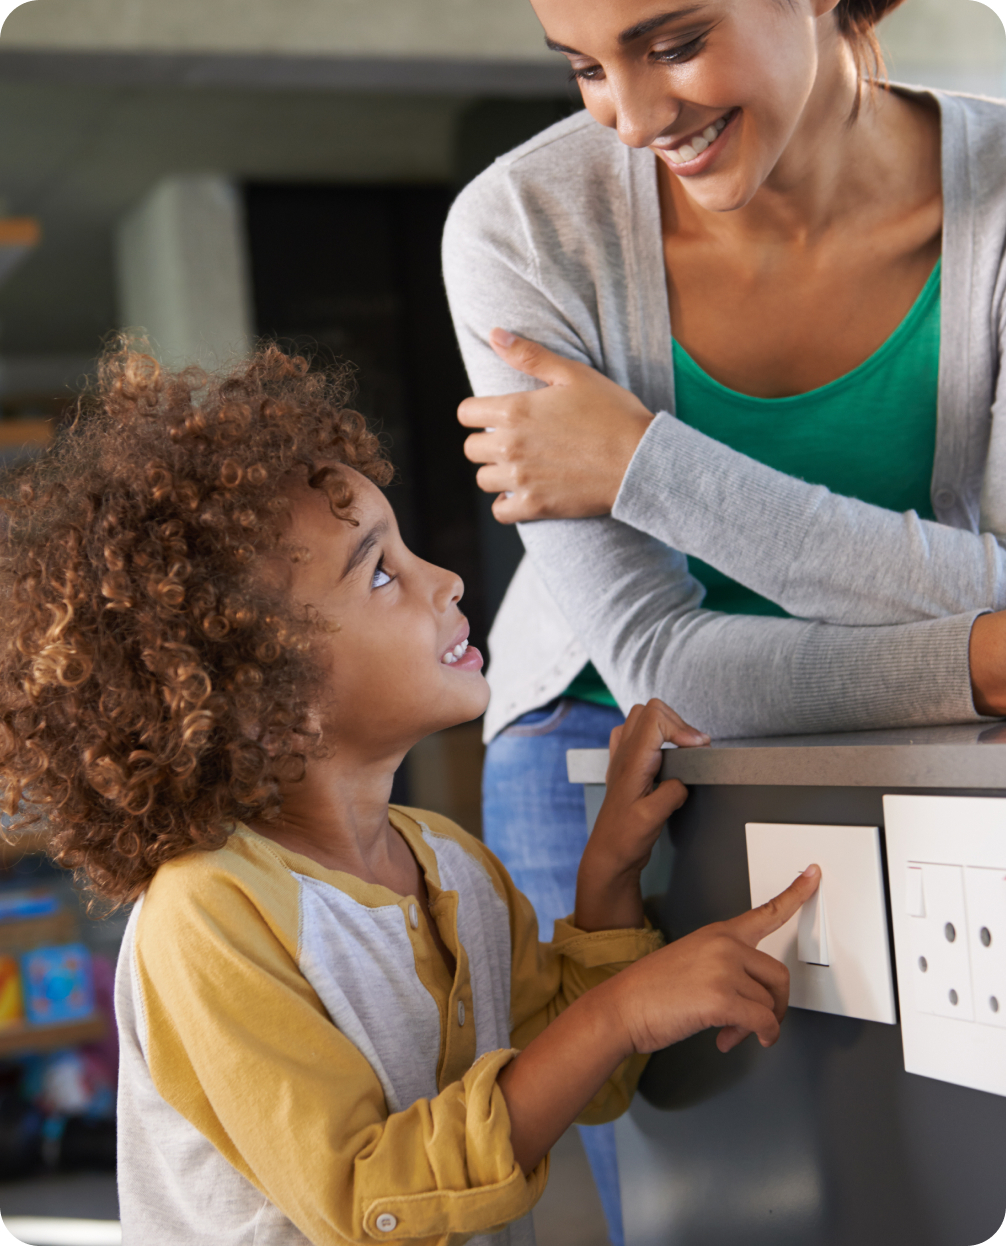 Mother smiling while looking at child that is smiling while touching a light switch.